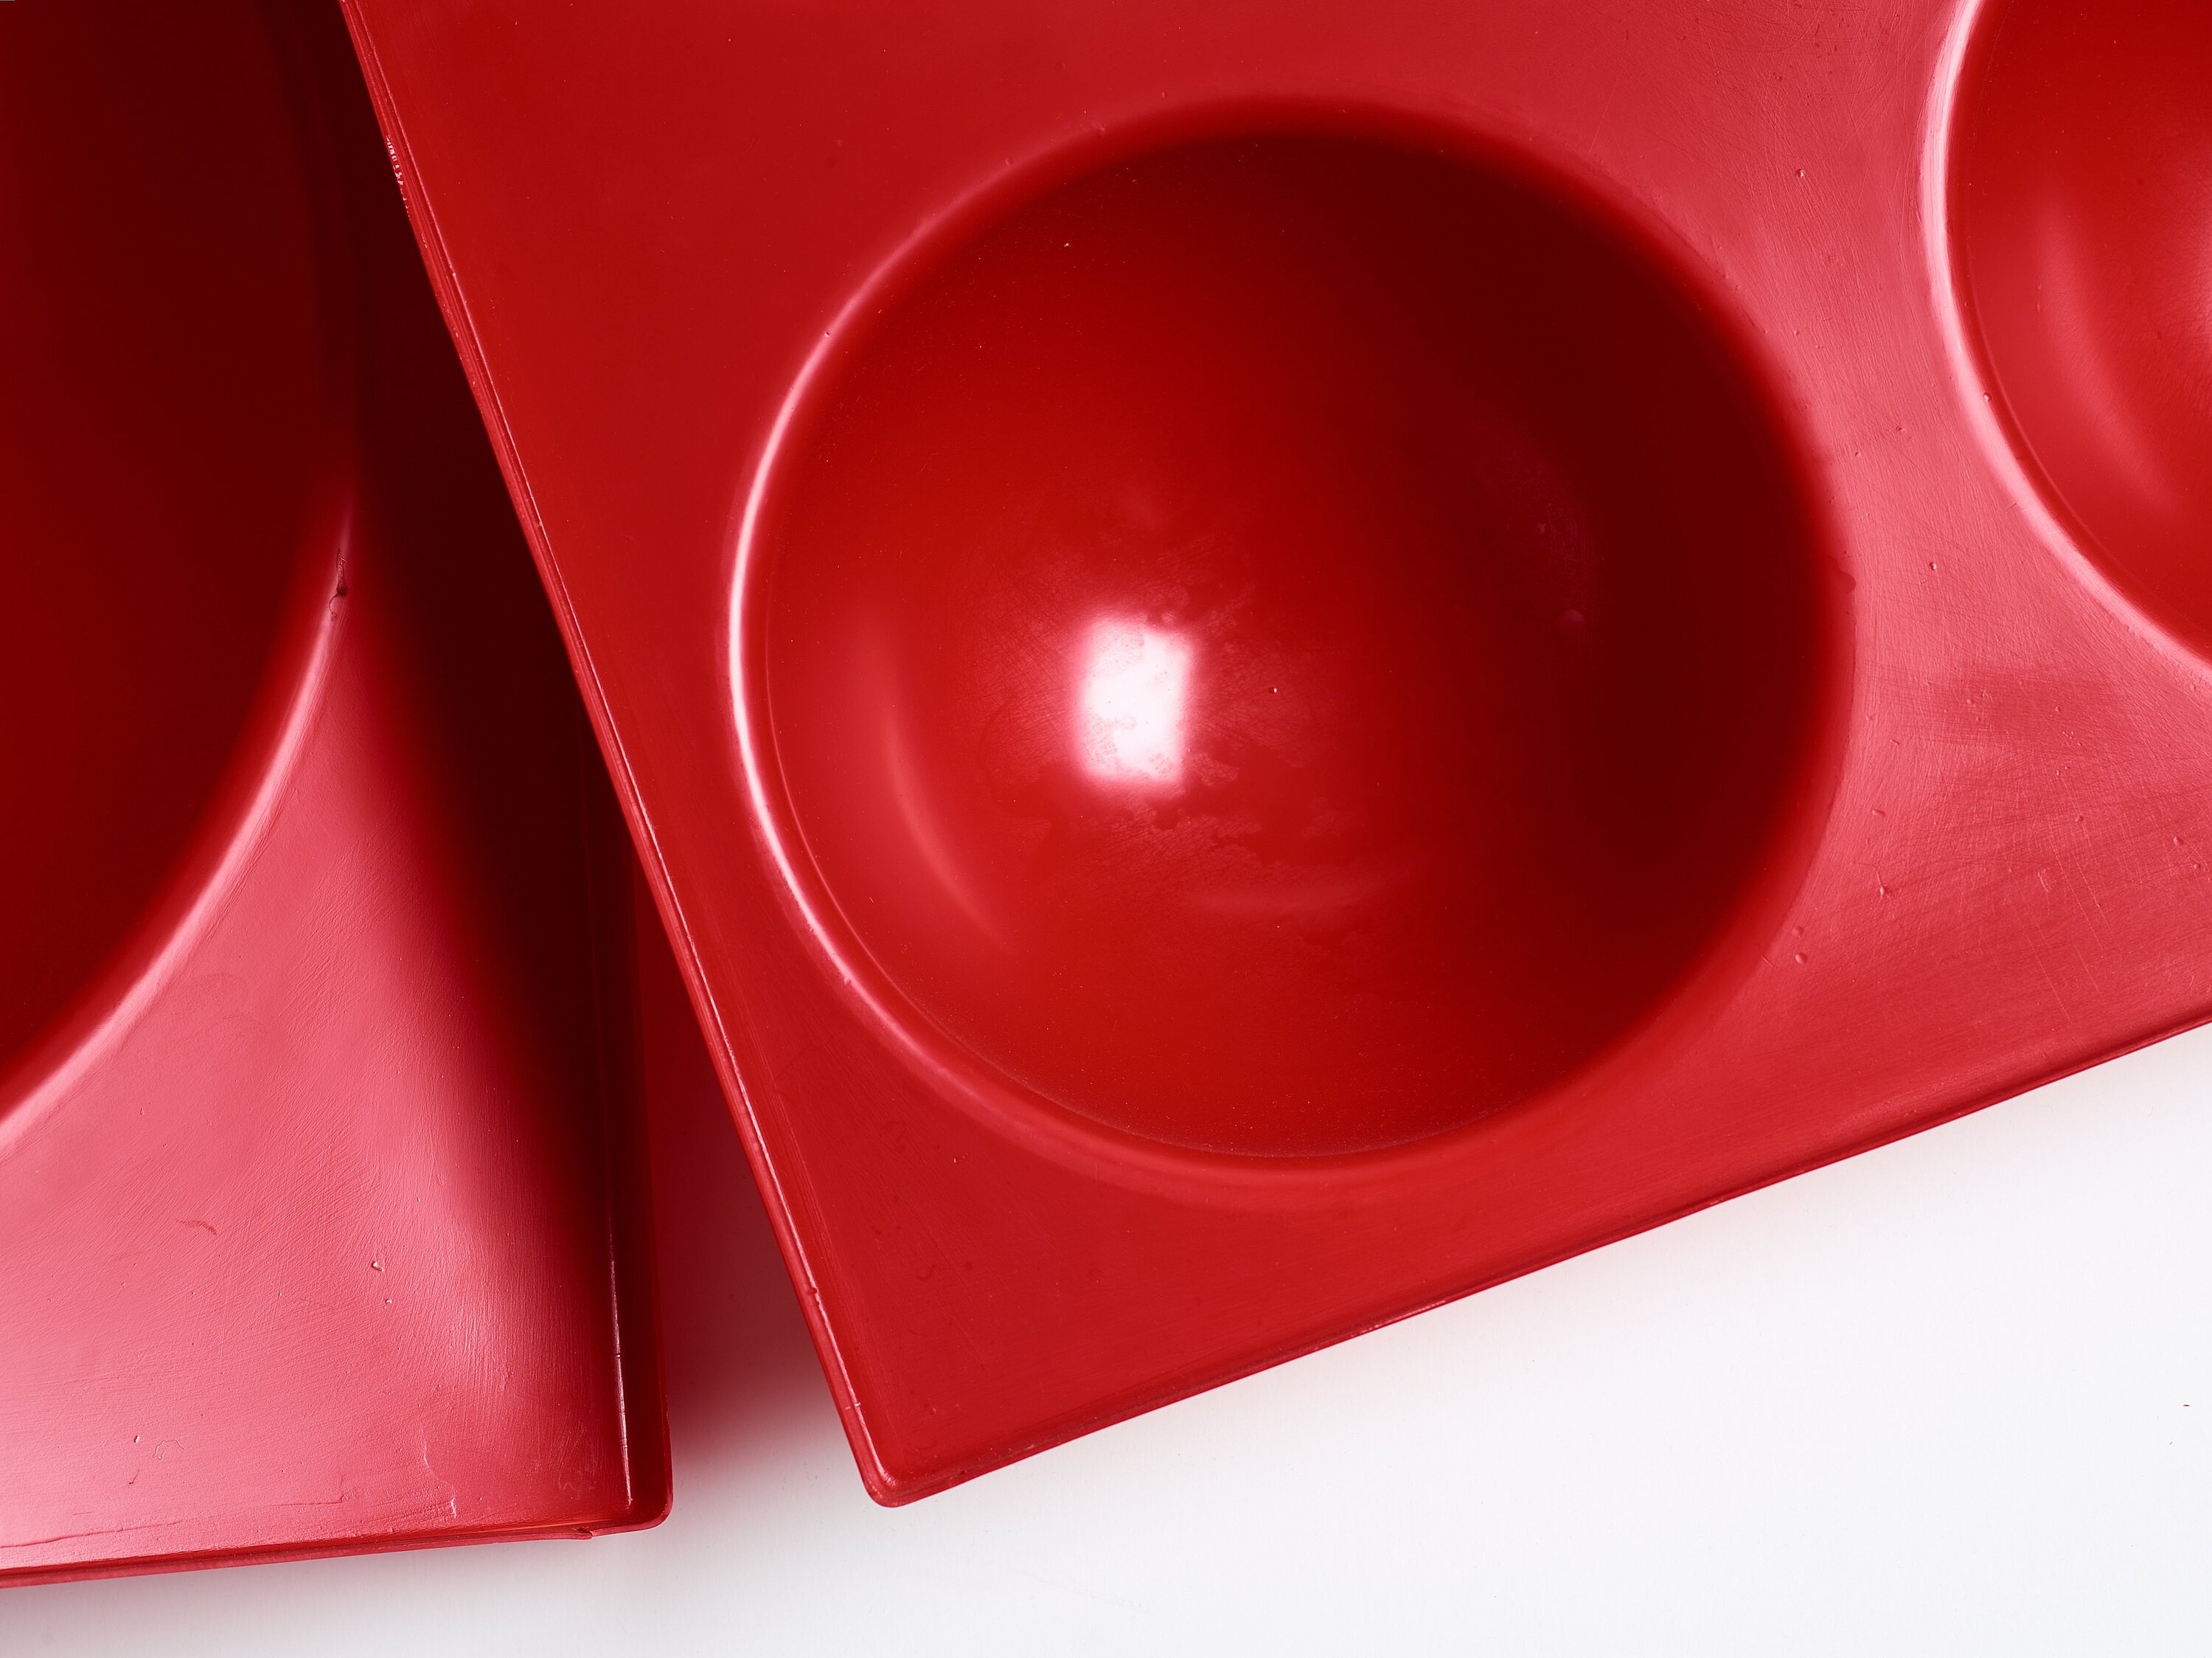 Artwork by Verner Panton, Bubbel panels, Made of Red plastic in relief